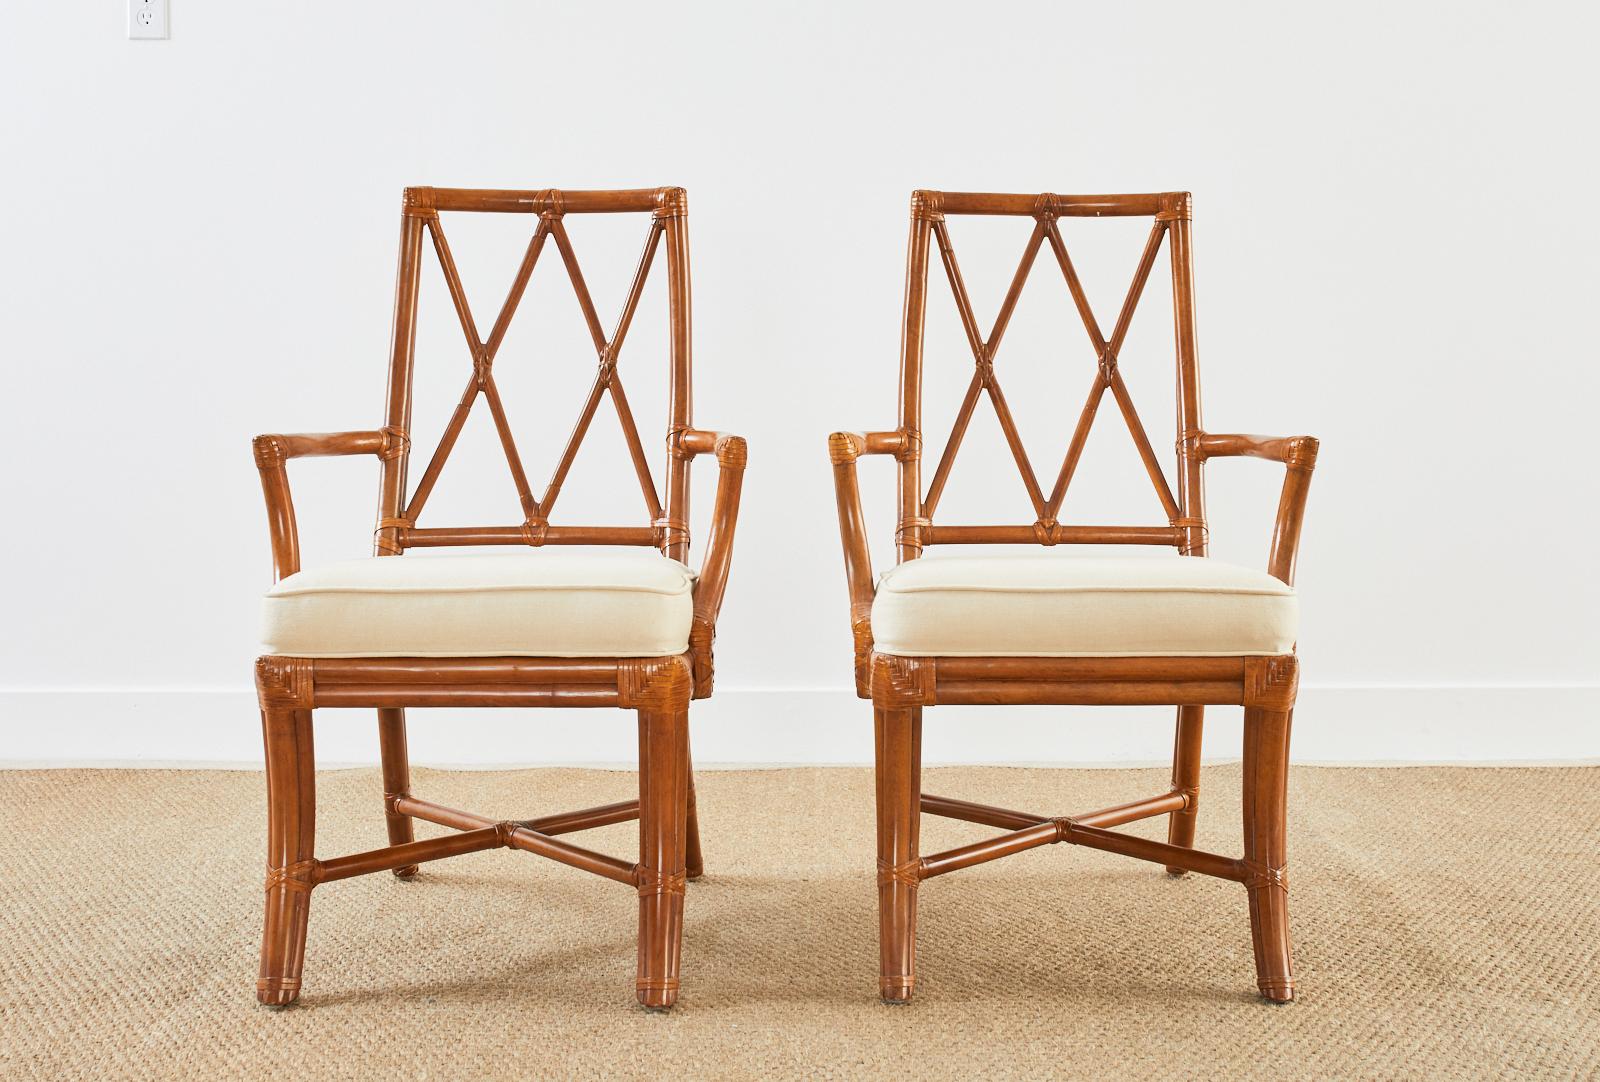 Hand-Crafted Set of Four McGuire Style Organic Modern Rattan Dining Chairs